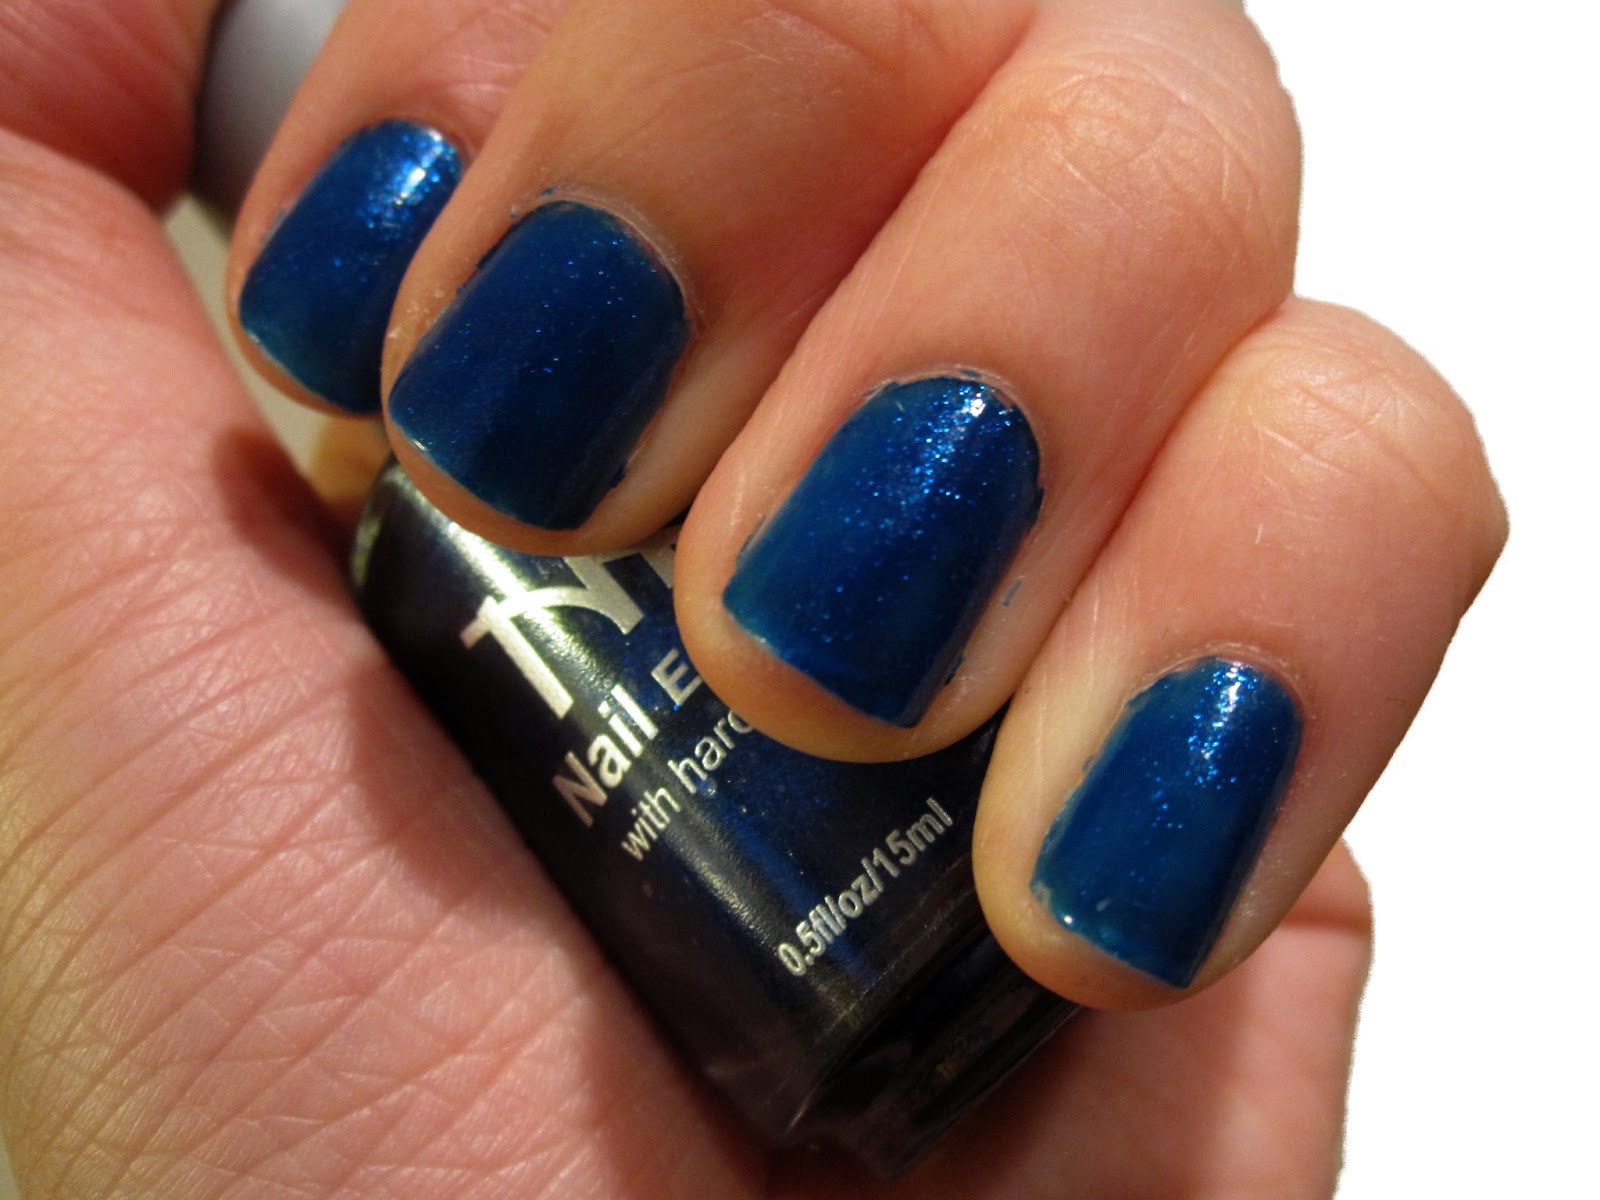 5. "Sapphire Blue" nail polish for a bold and elegant anniversary outfit - wide 7